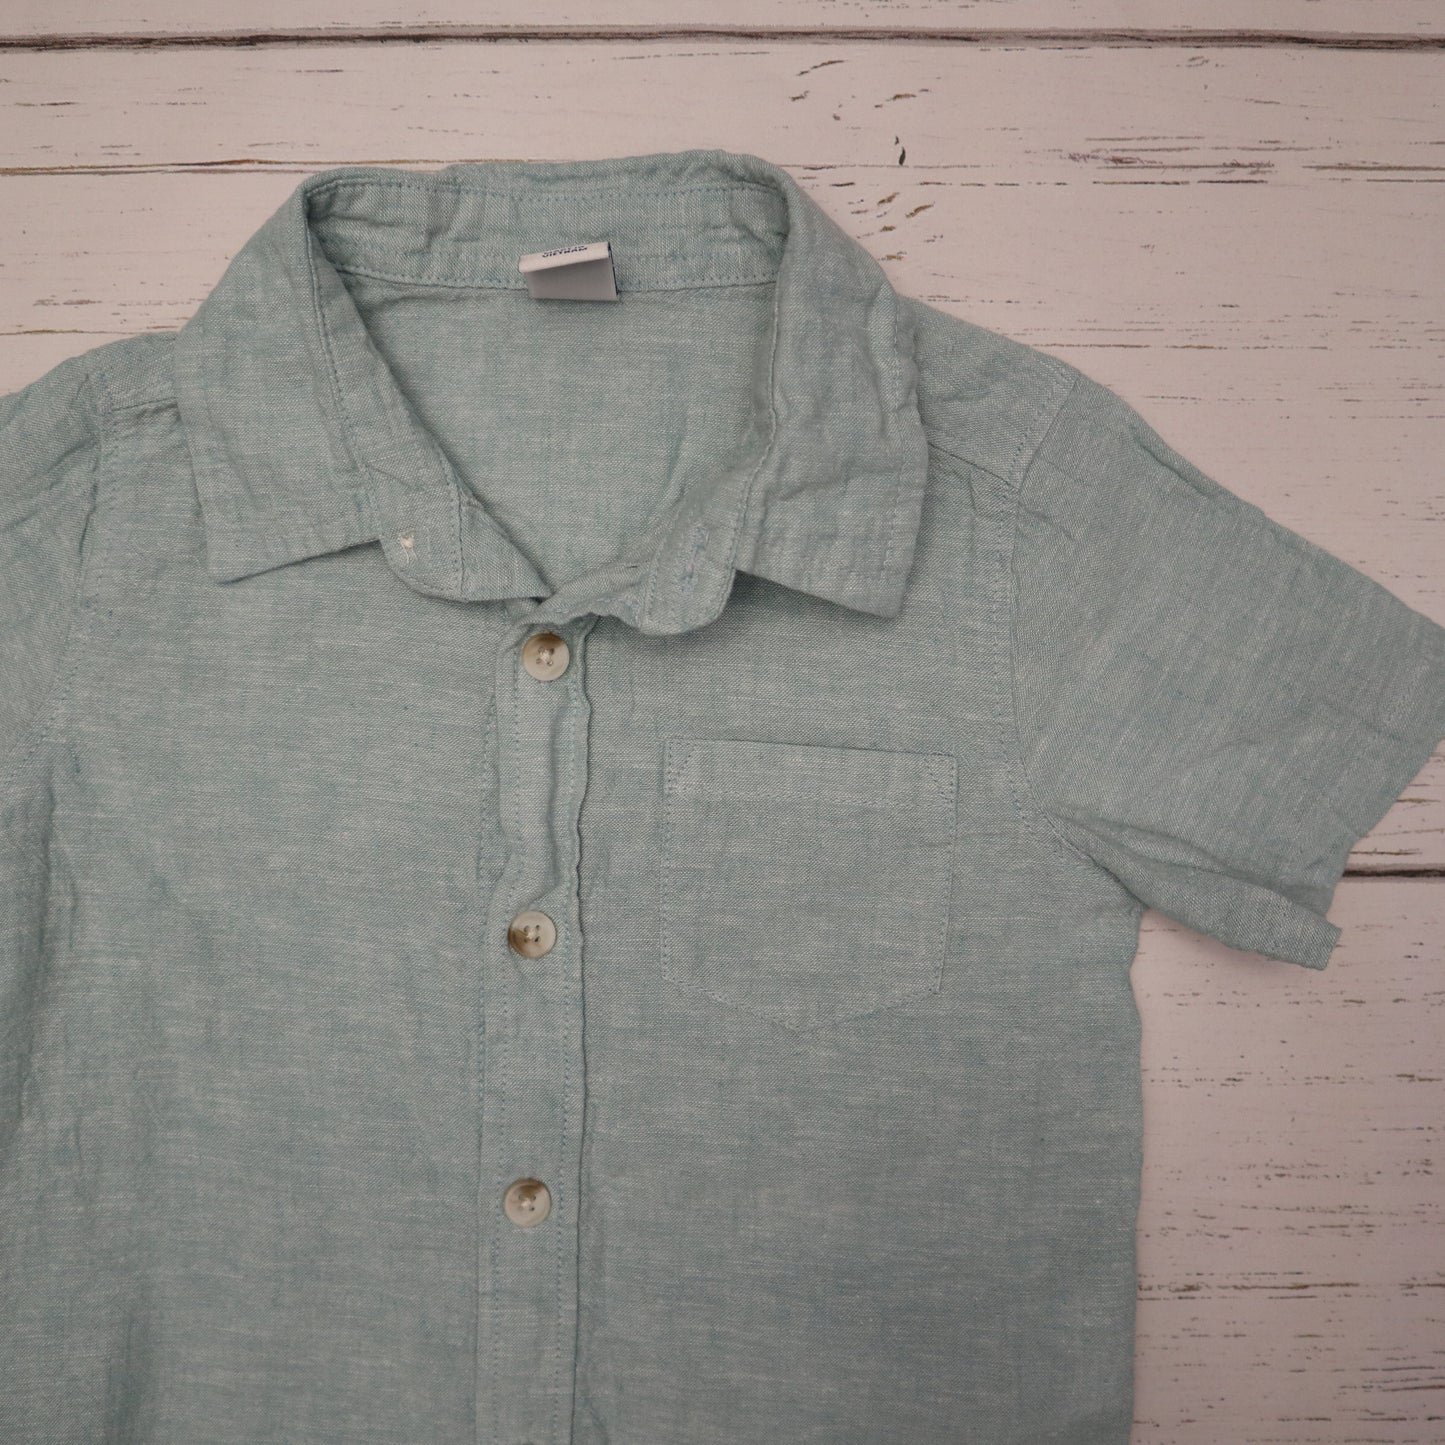 Old Navy - T-Shirt (2T)